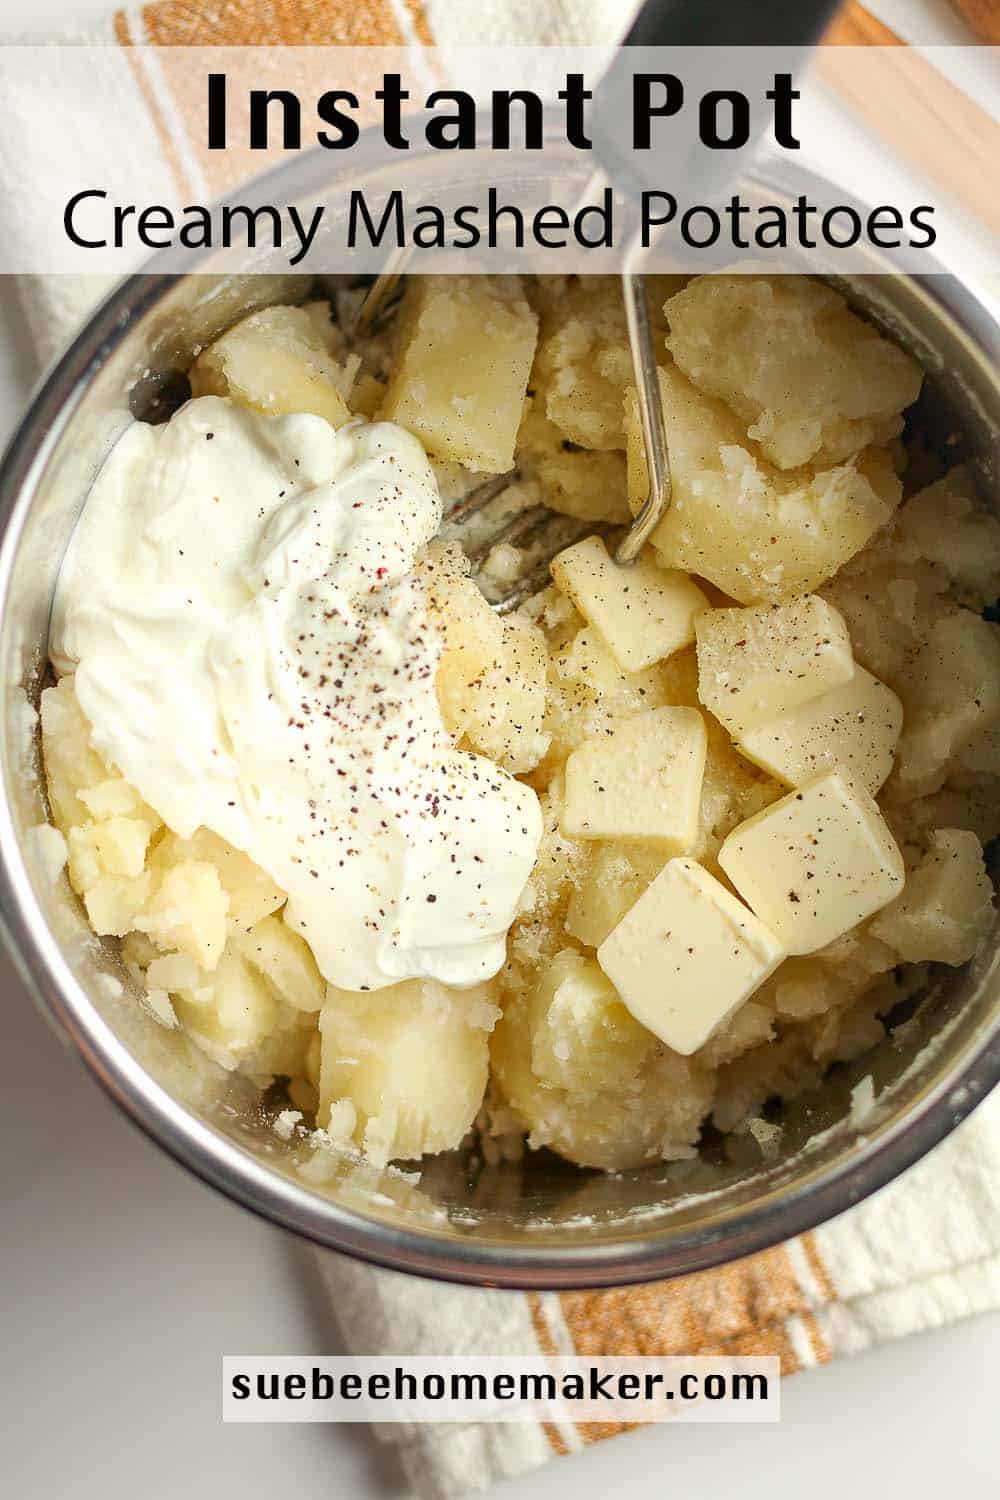 An instant pot with cooked chopped potatoes and toppings with a potato masher.